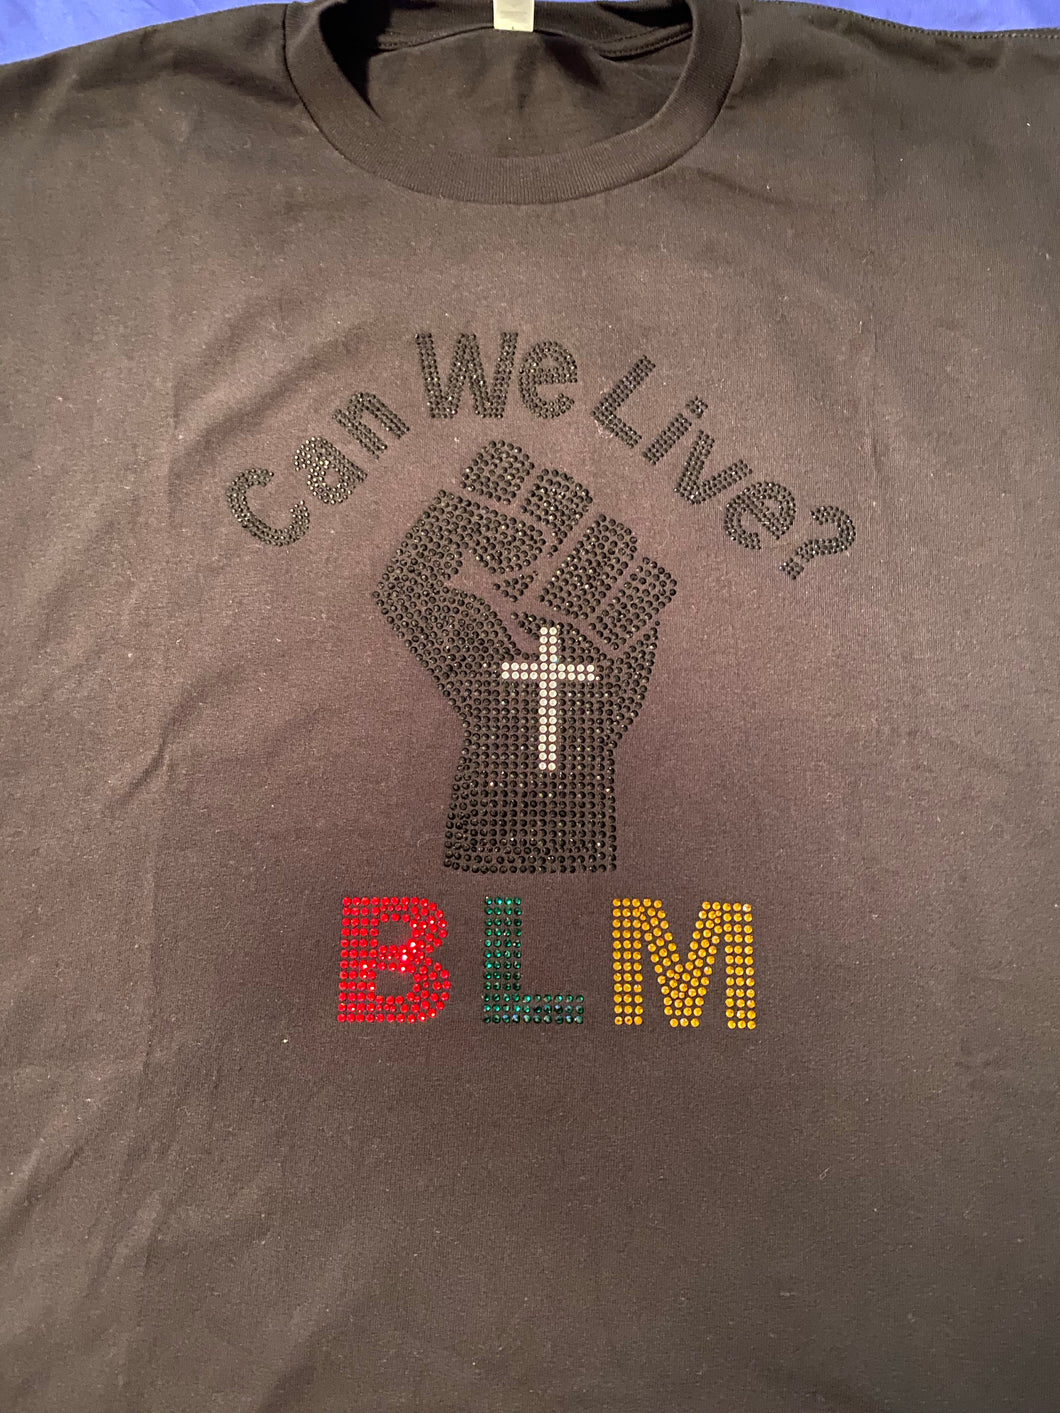 Can We Live? BLM bling shirt